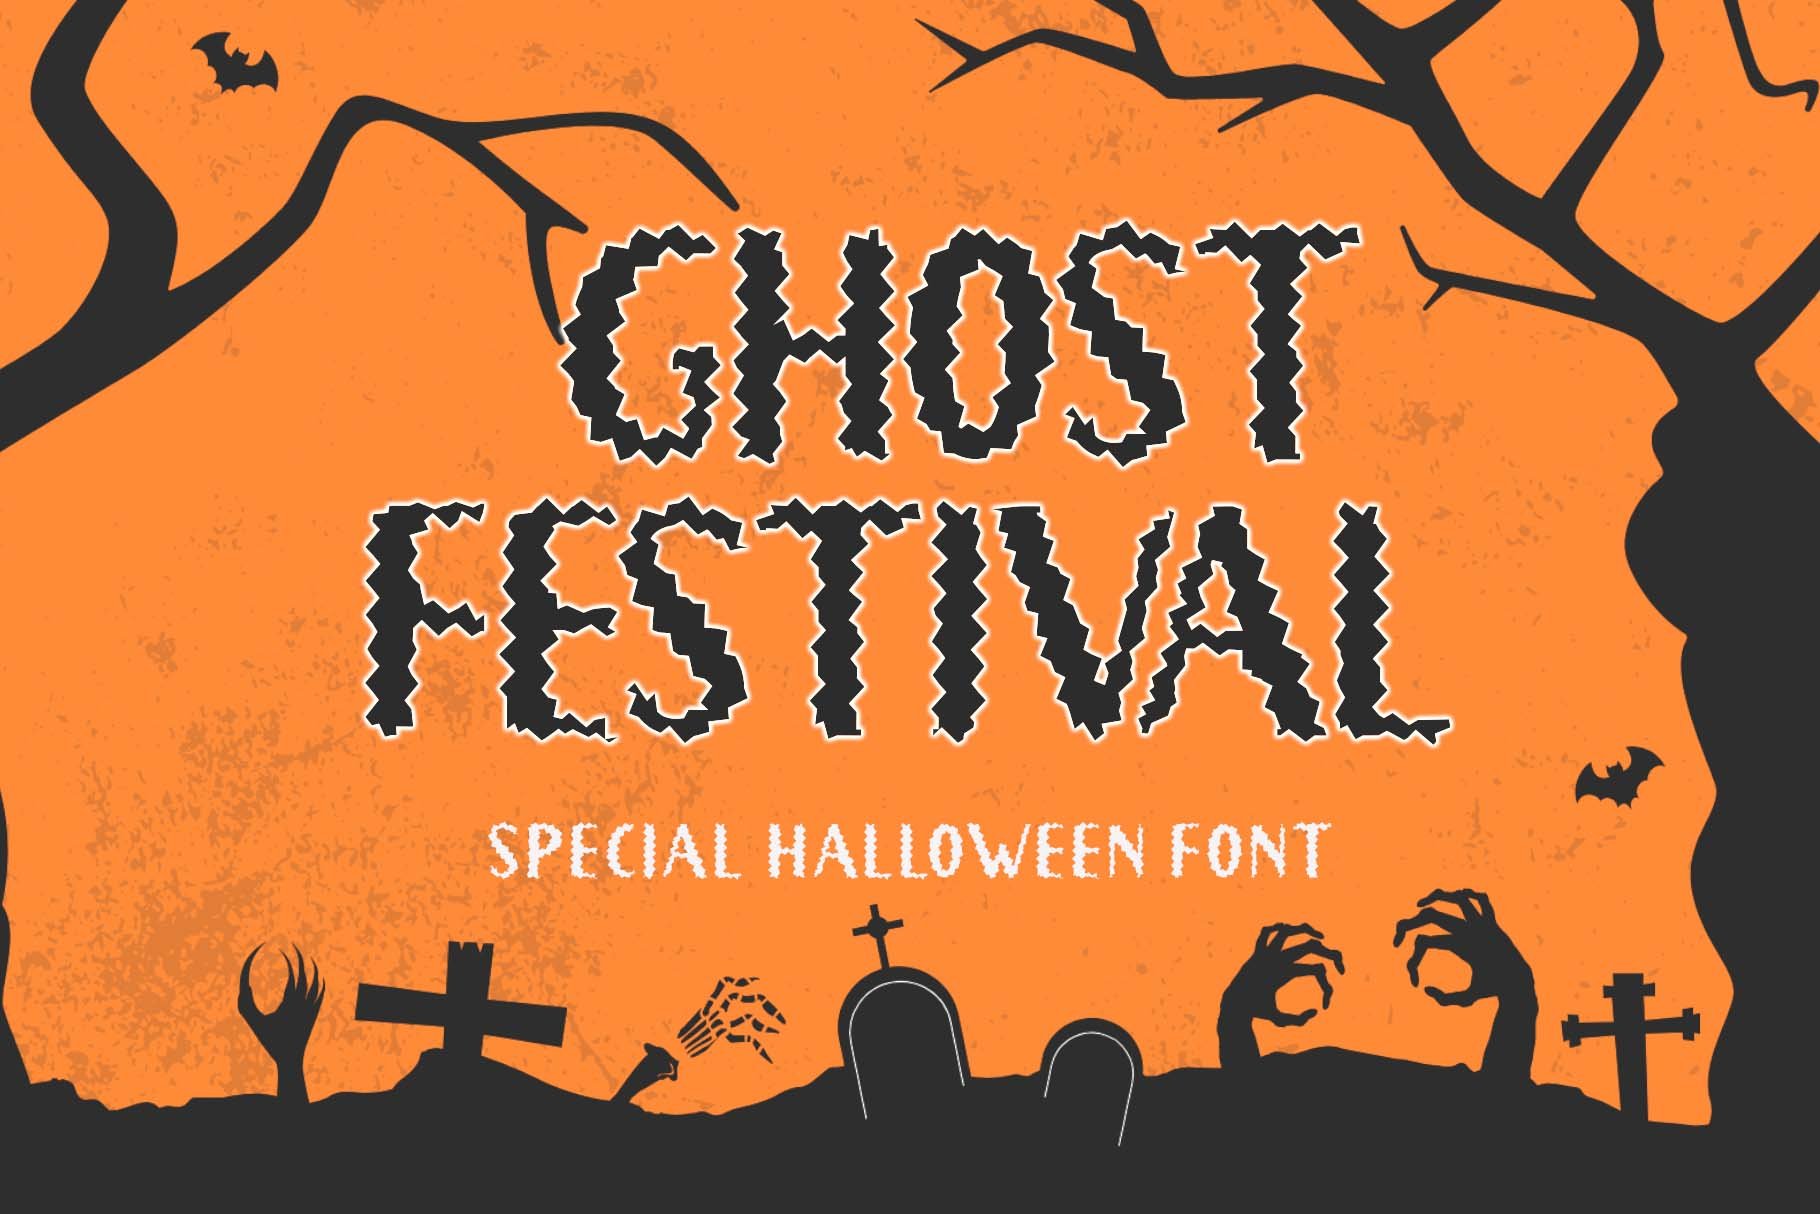 Ghost Festival cover image.